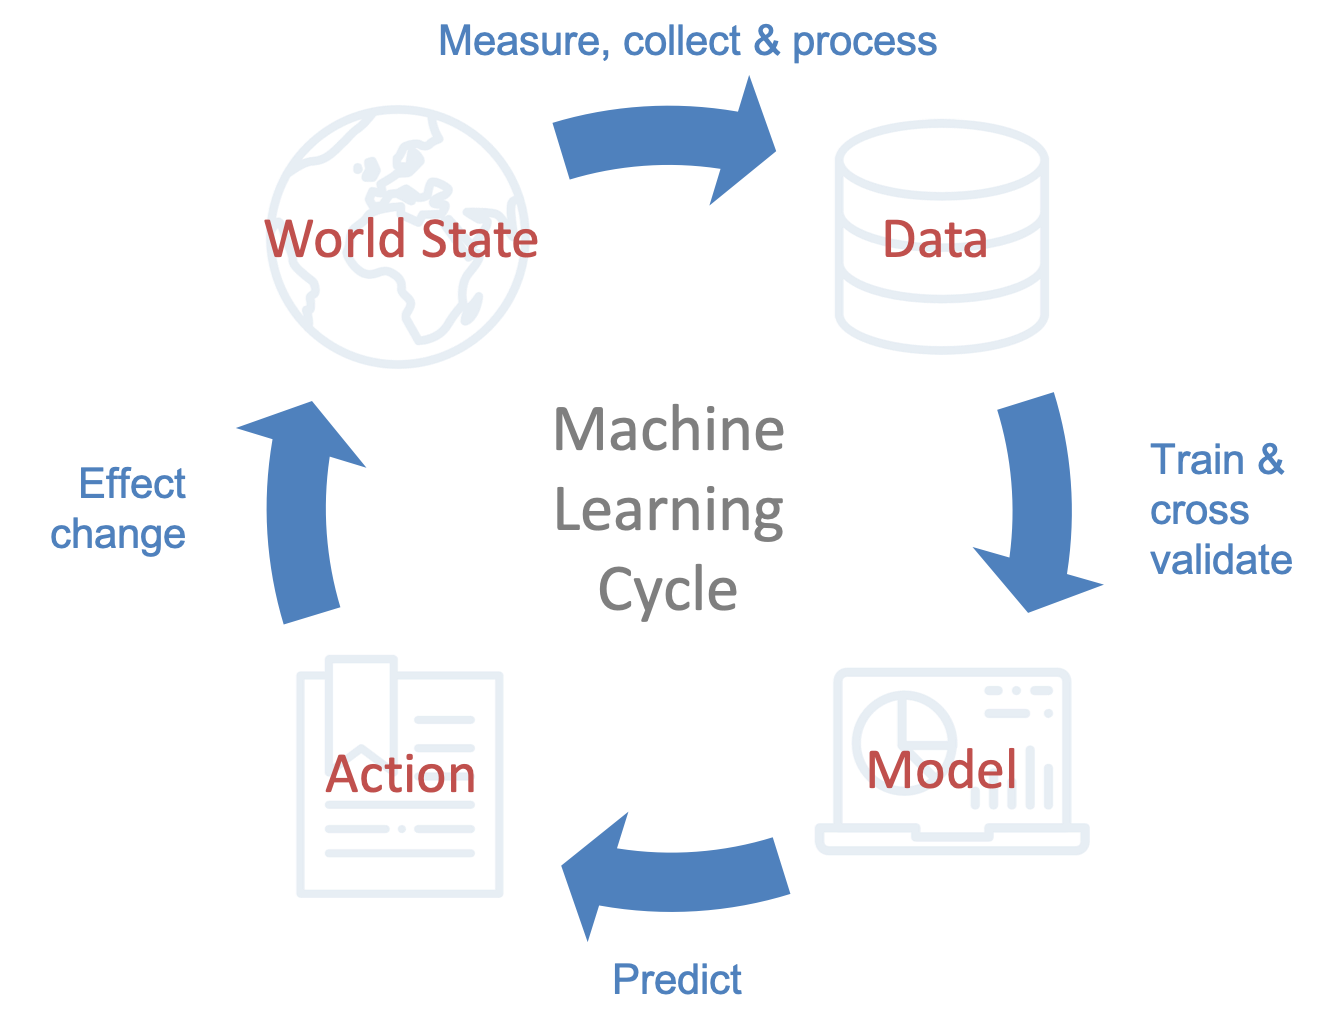 Figure 2.1: The machine learning cycle